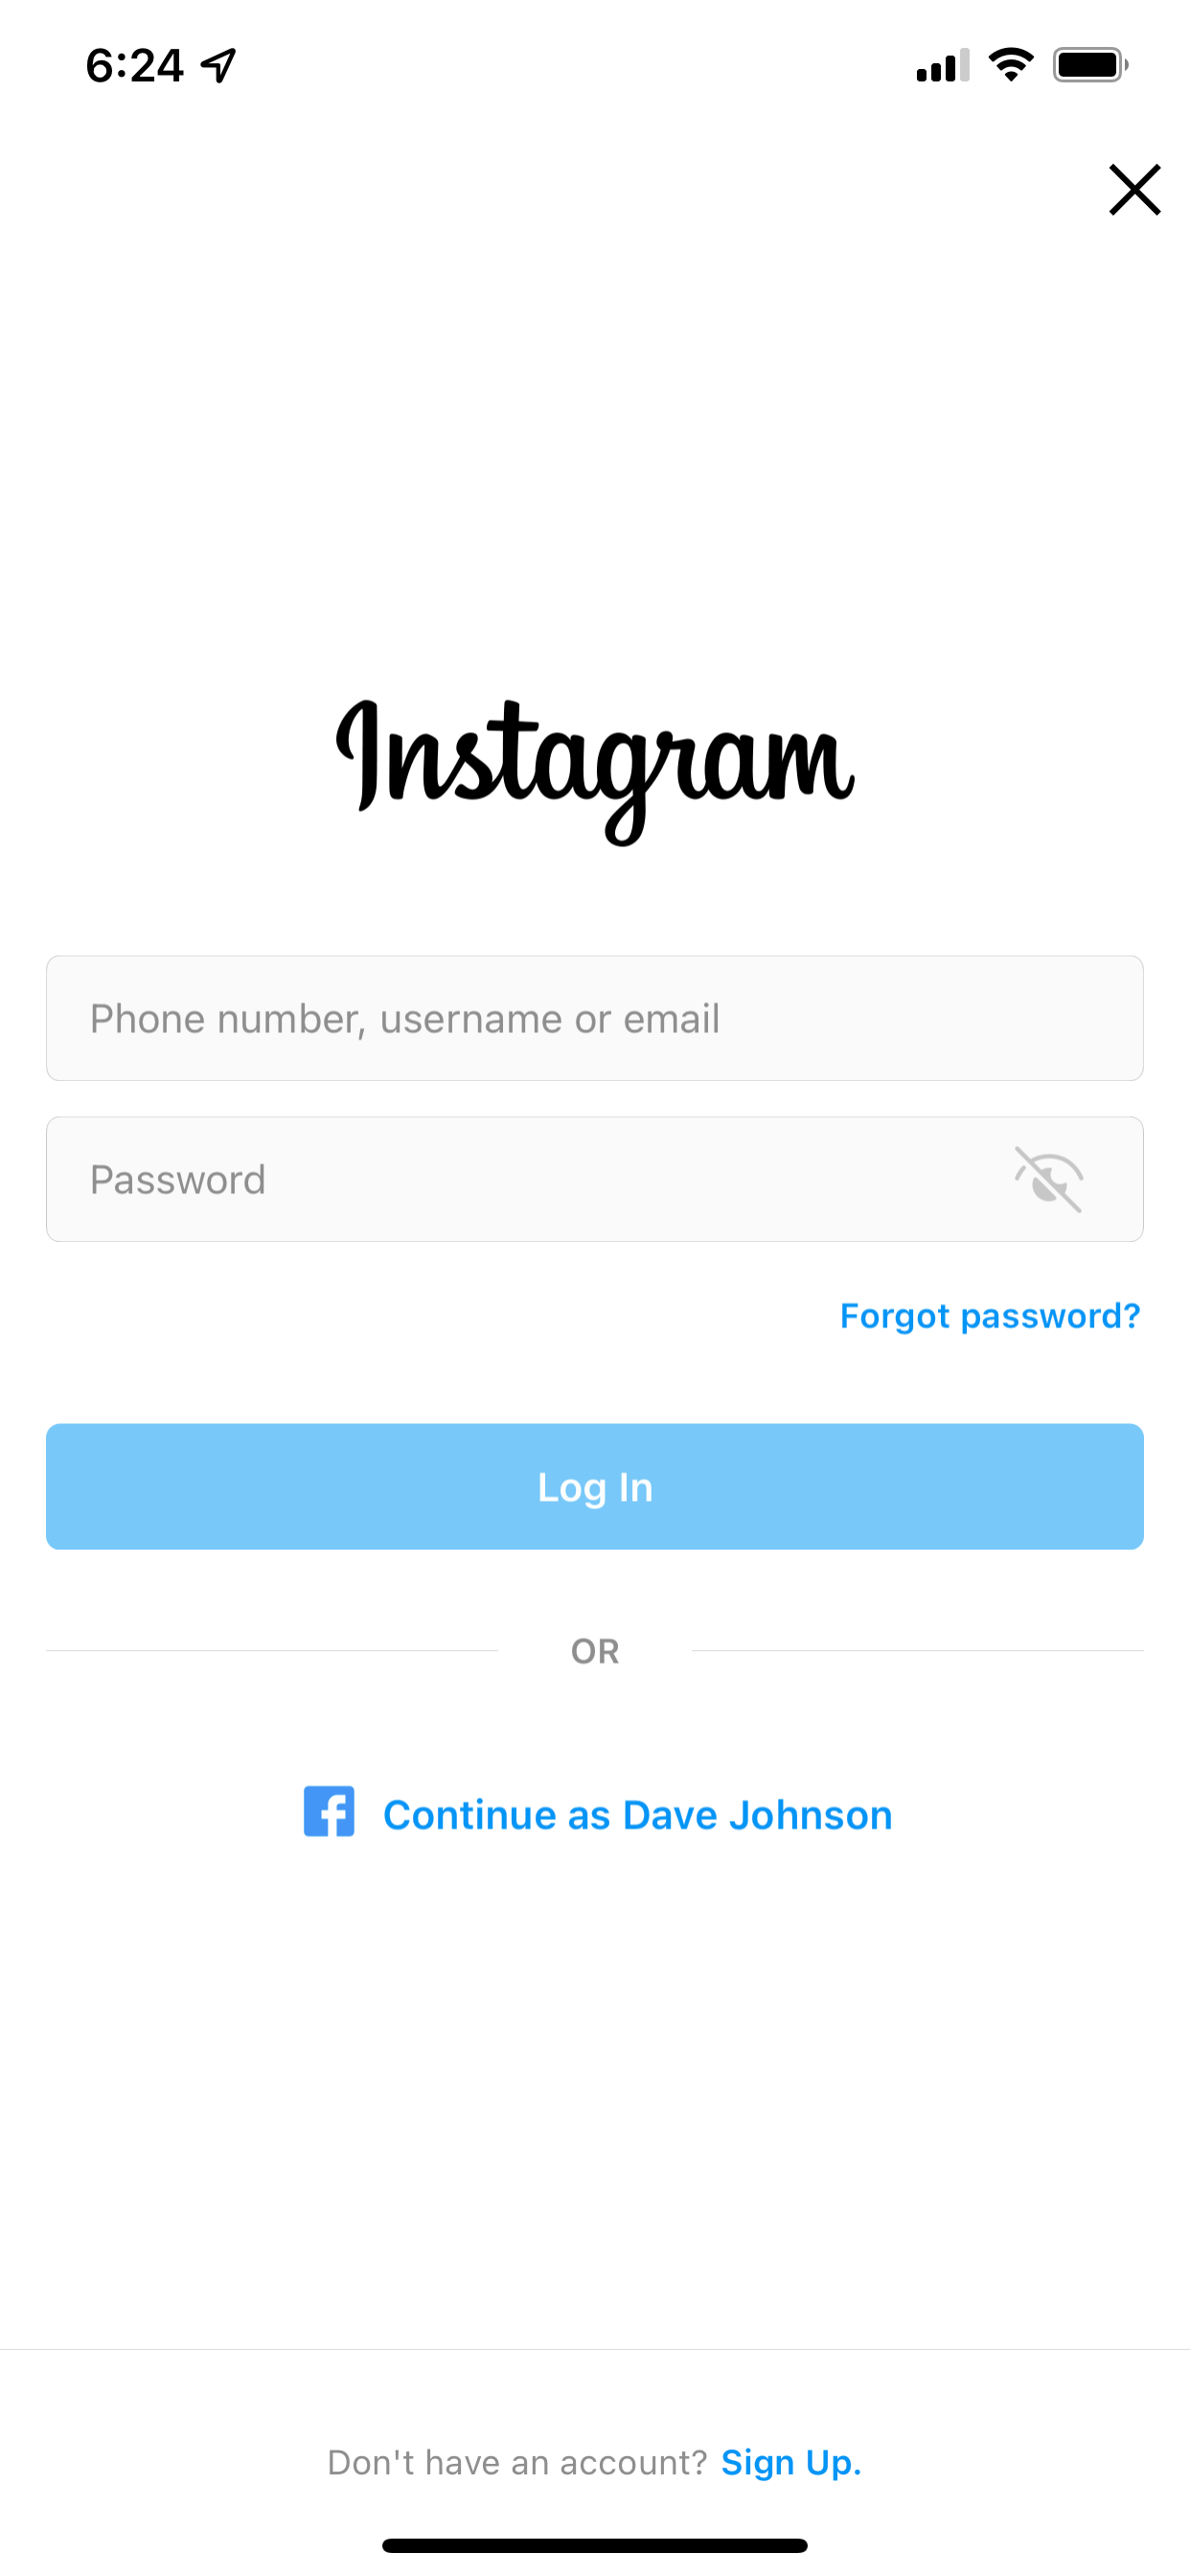 [Instagram-login - The Instagram login page on an iPhone.]